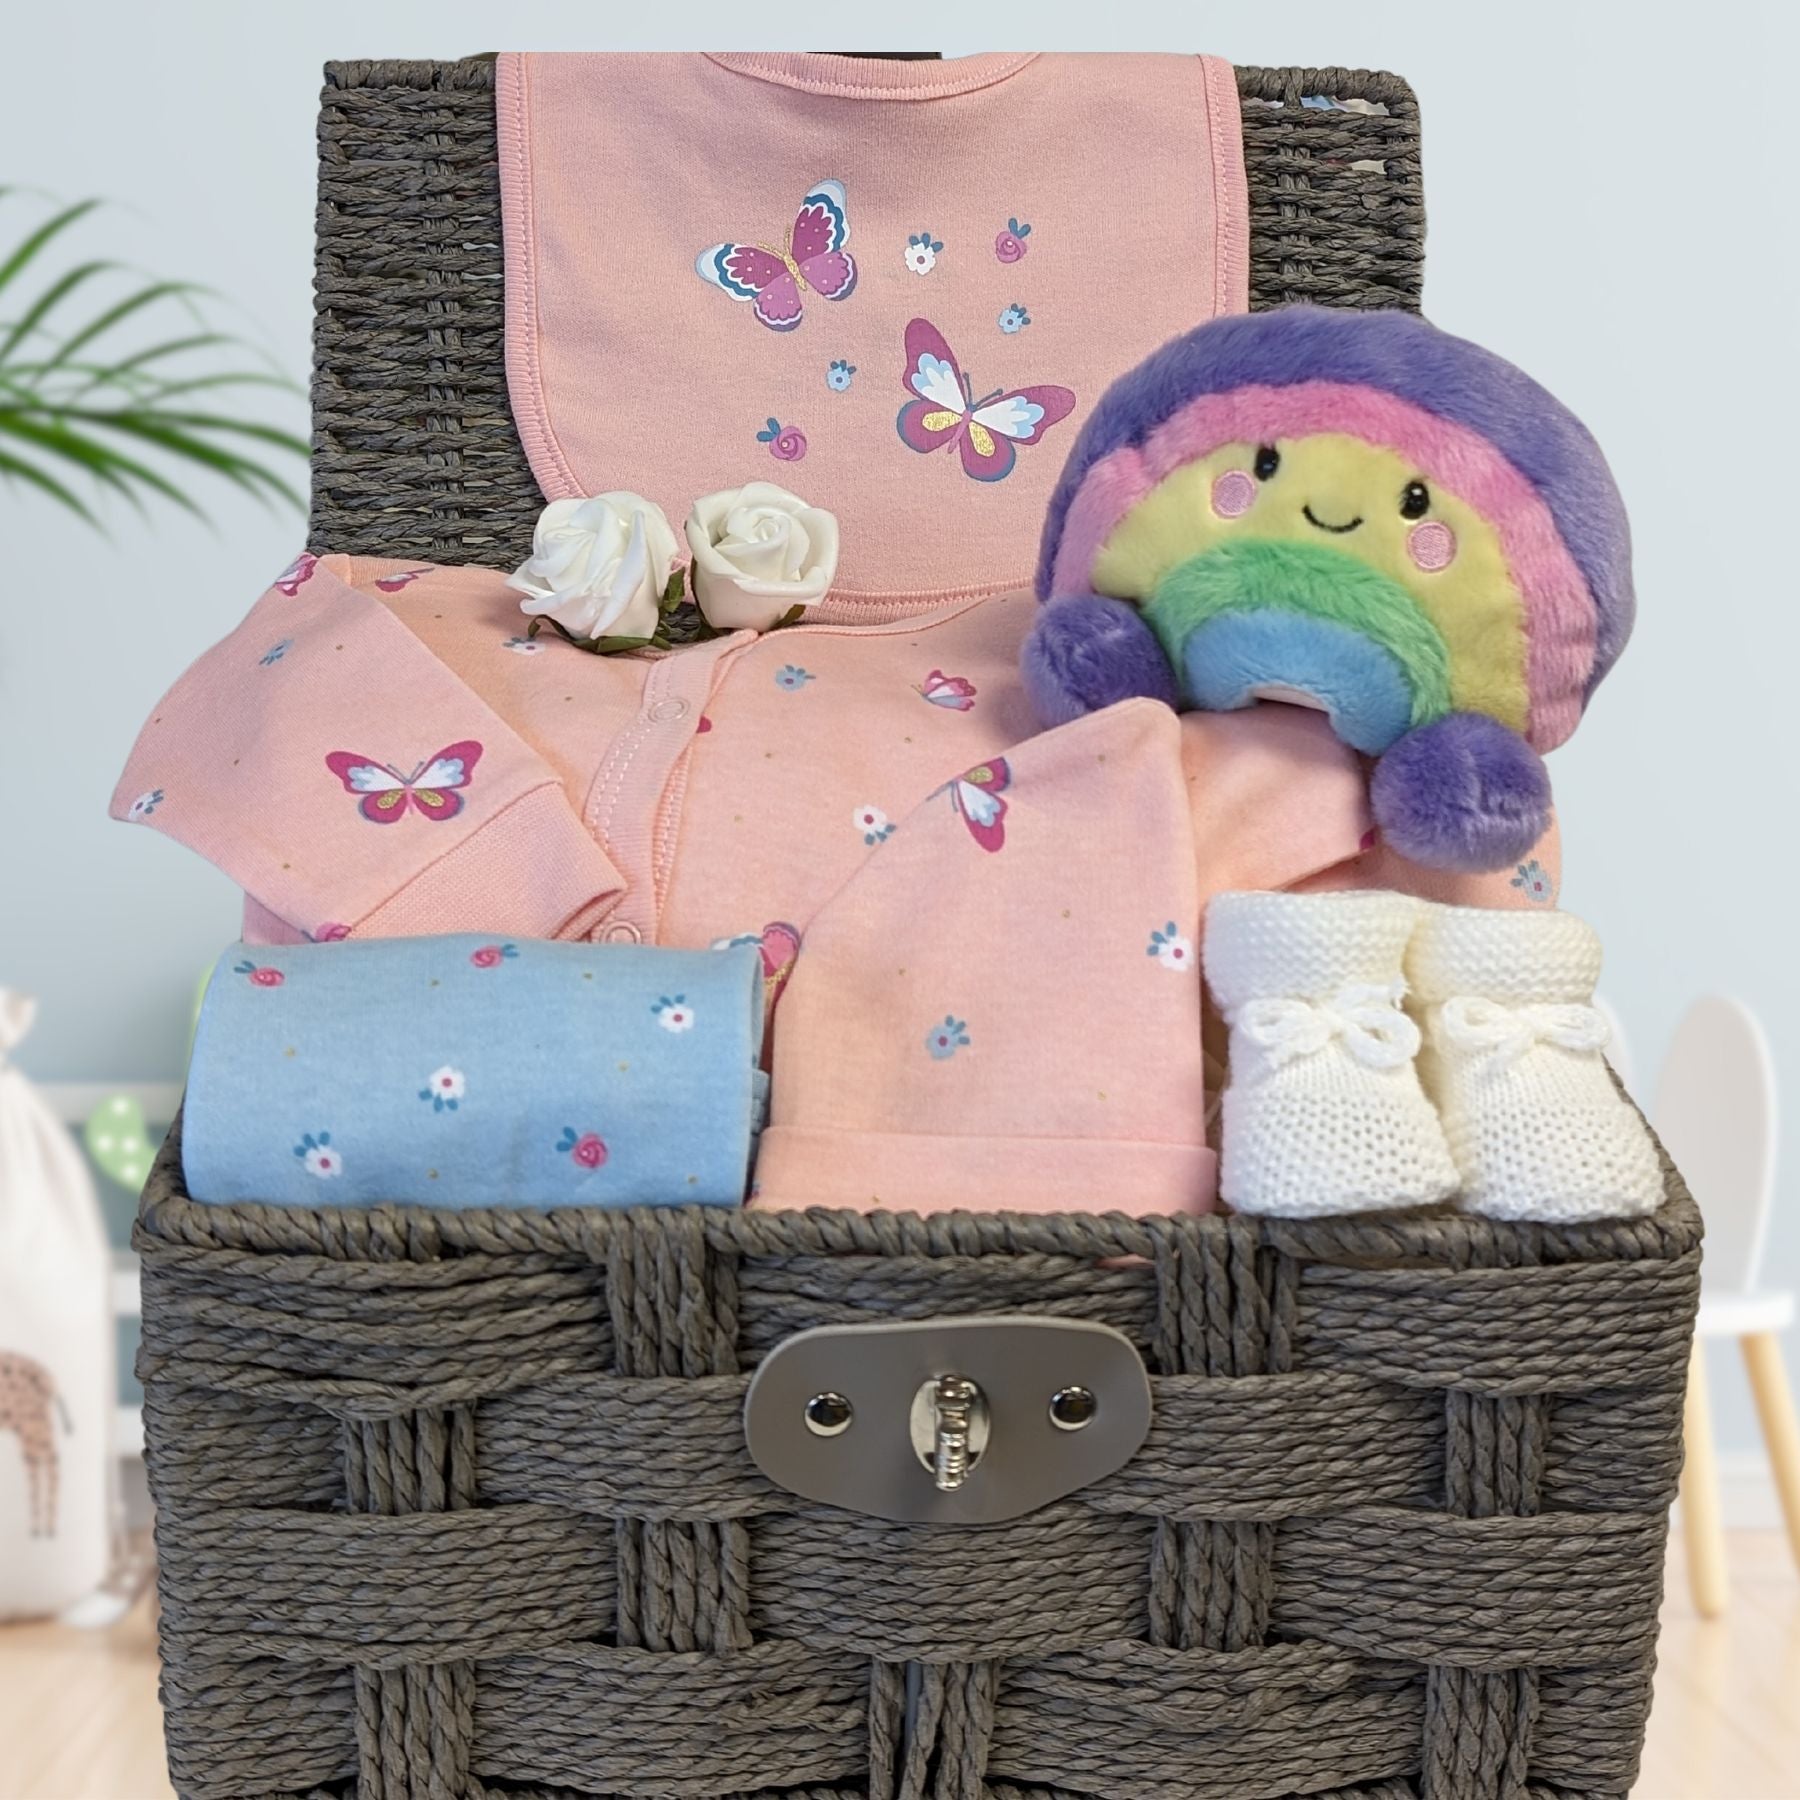 baby girl hamper with butterfly and rainbow theme. Includes rainbow soft toy and baby booties.